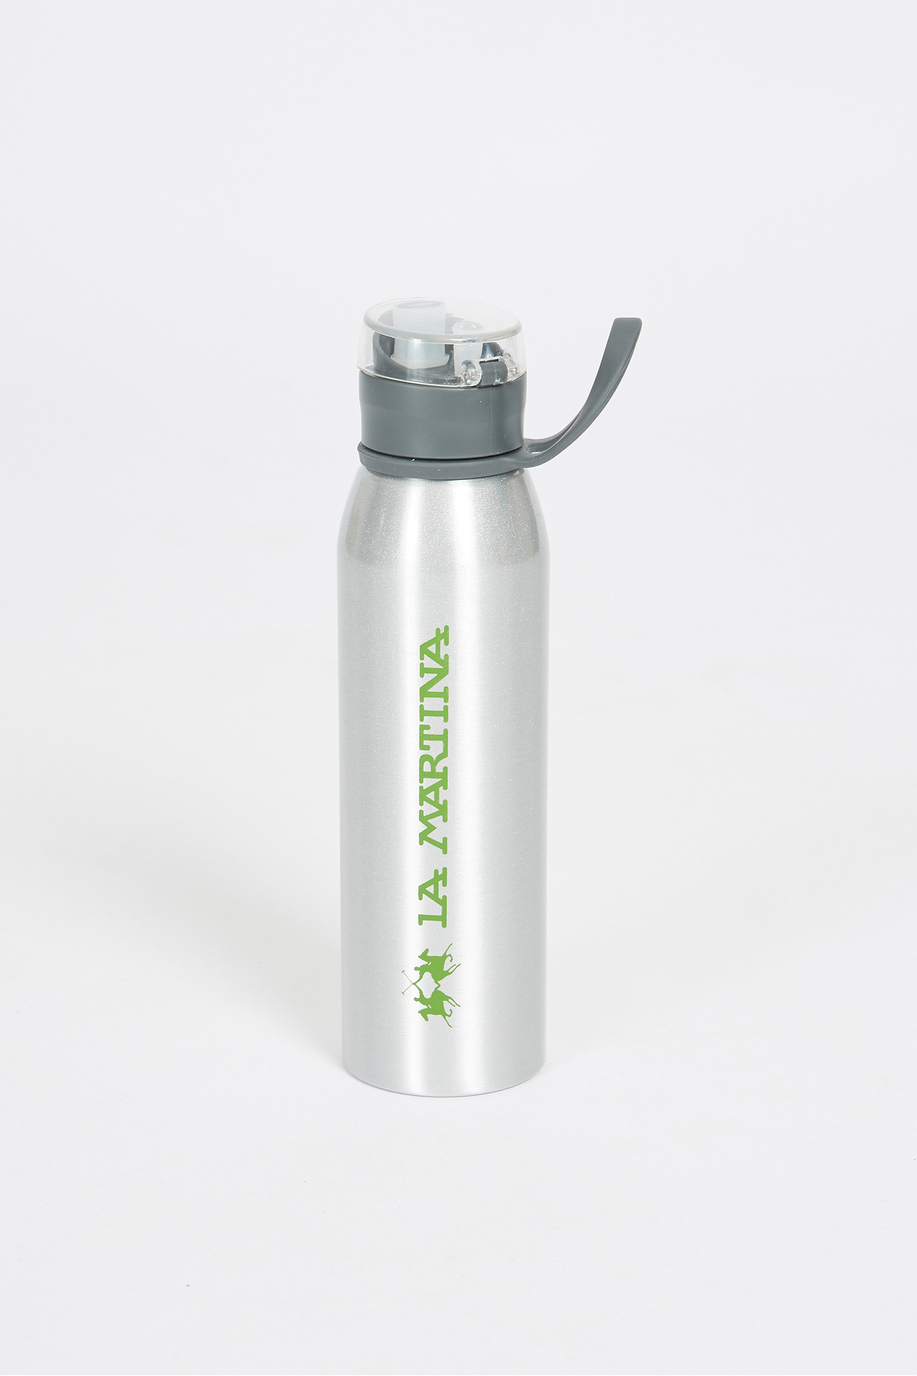 Unisex aluminium bottle with a watertight lid and logo - Monogrammed gifts for him | La Martina - Official Online Shop